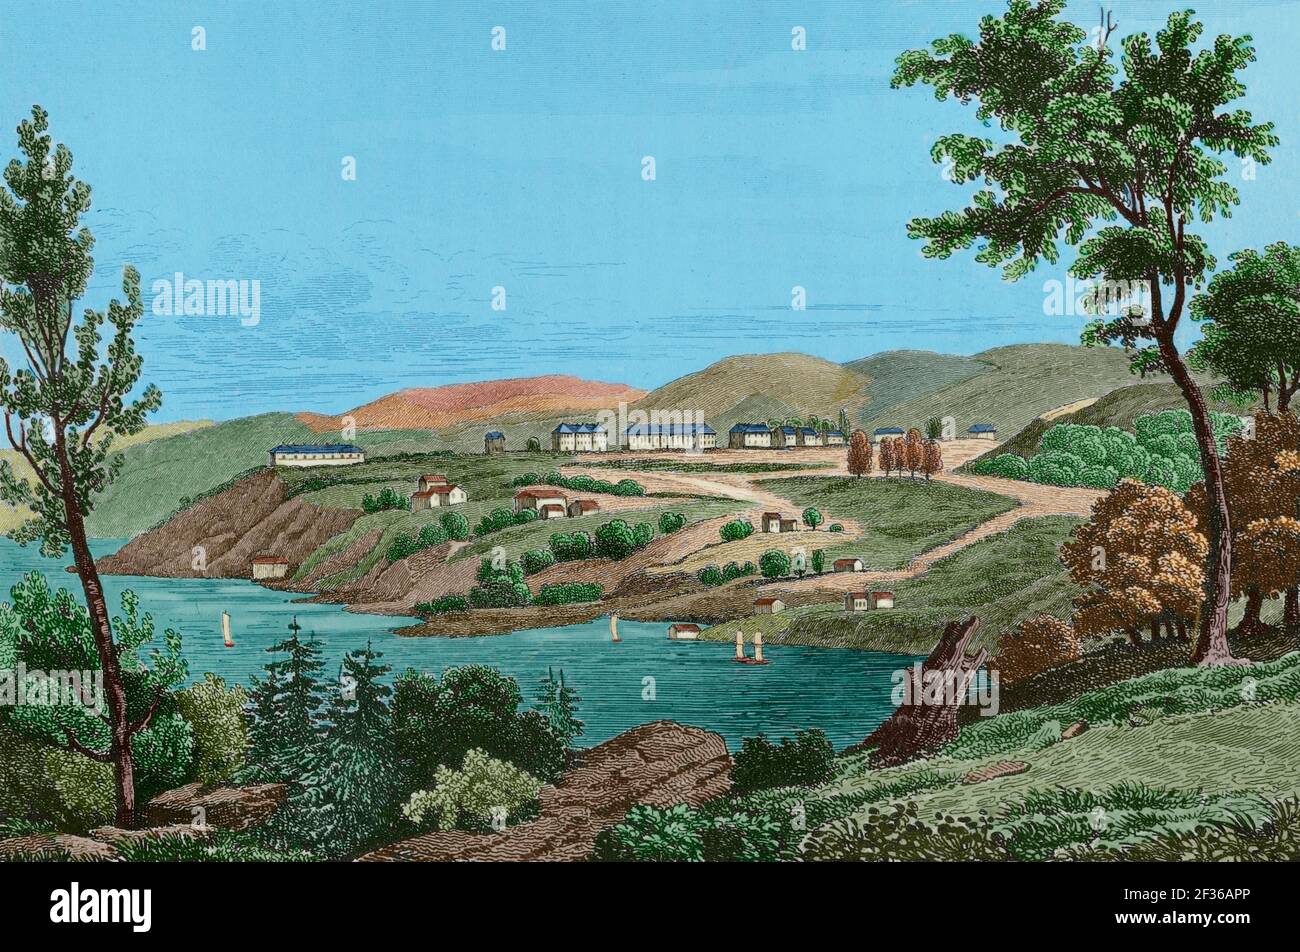 View of West Point. The United States Military West Point. Washington selected Thaddeus Kosciuszko, one of the heroes of Saratoga, to design the fortifications for West Point in 1778. President Thomas Jefferson established the United States Military Academy in 1802, by the Hudson River, north of New York. Engraving by Milbert. Panorama Universal. History of the United States of America, from 1st edition of Jean B.G. Roux de Rochelle's Etats-Unis d'Amérique in 1837. Spanish edition, printed in Barcelona, 1850. Later colouration. Stock Photo